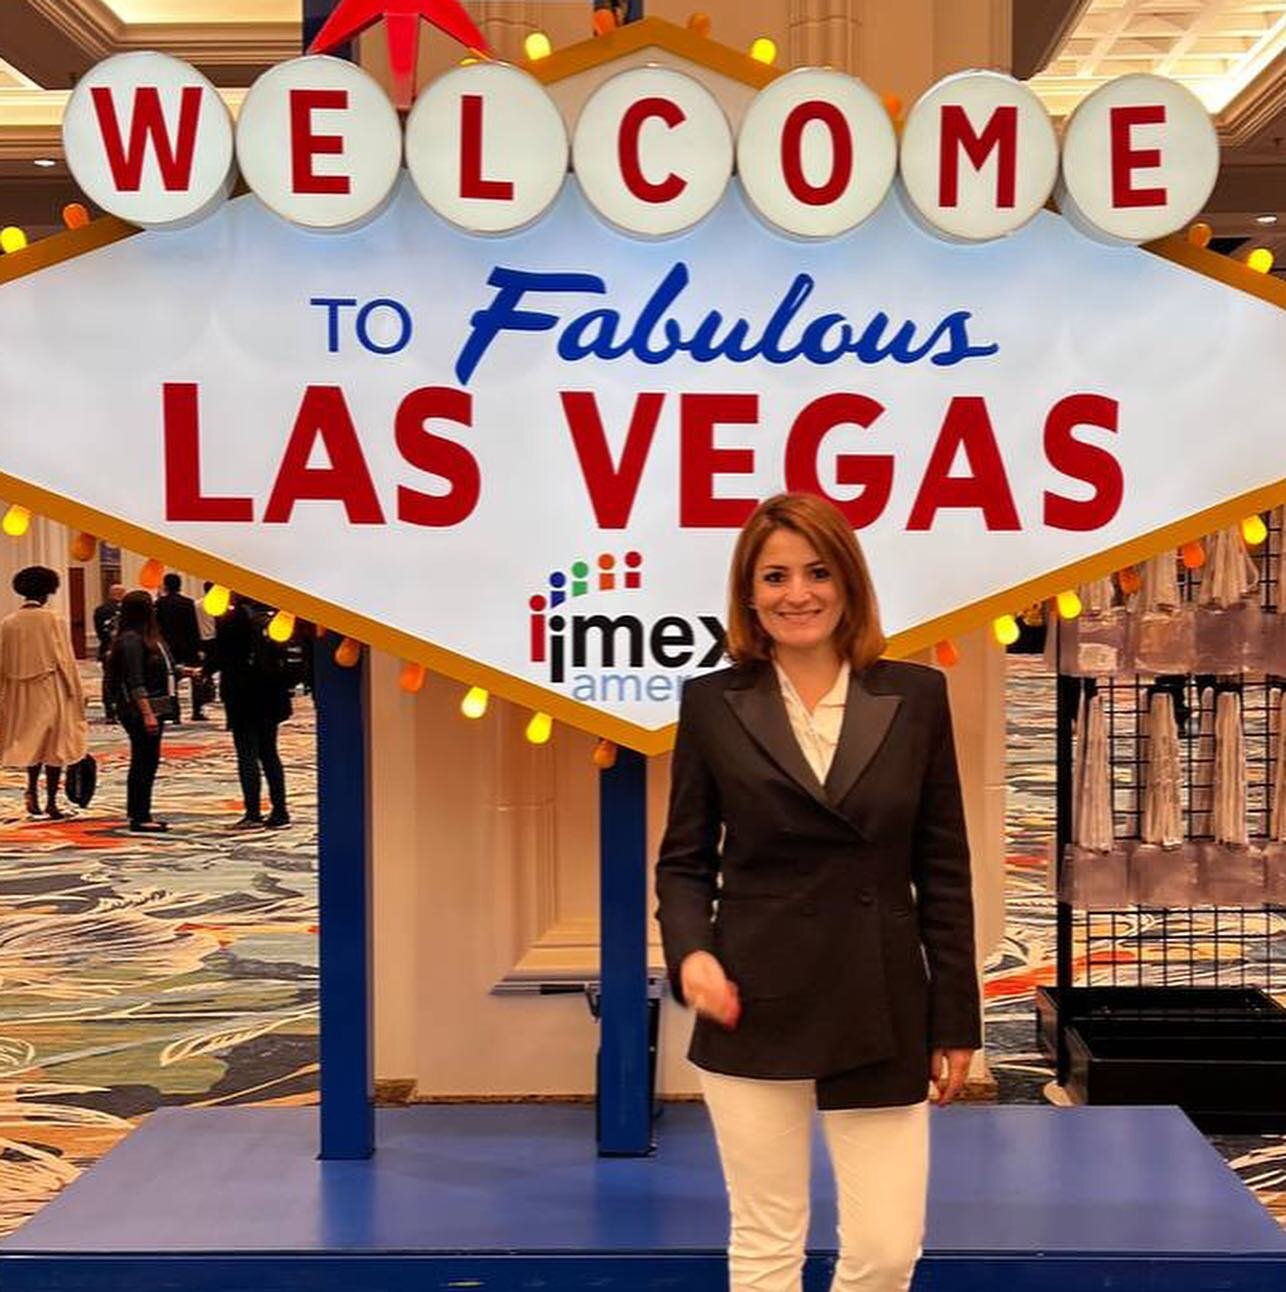 Check out some of our favorite booths at IMEX America. Overall the show floor was full of creatively designed booths. Congrats to all the exhibitors who showcased their destinations in some new and exciting ways!